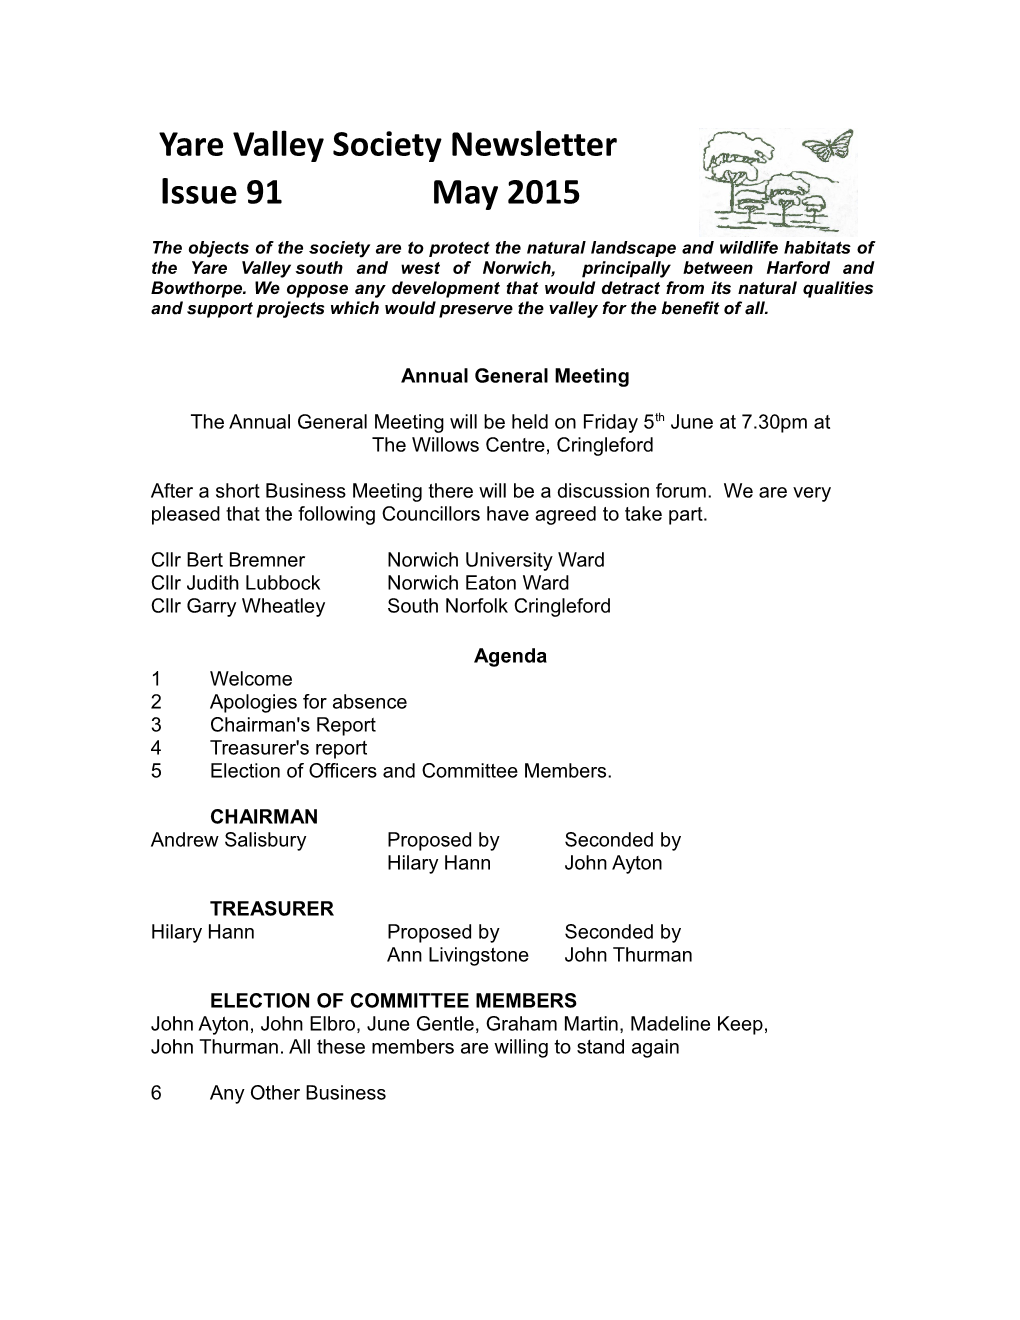 Yare Valley Society Newsletter Issue 91 May 2015